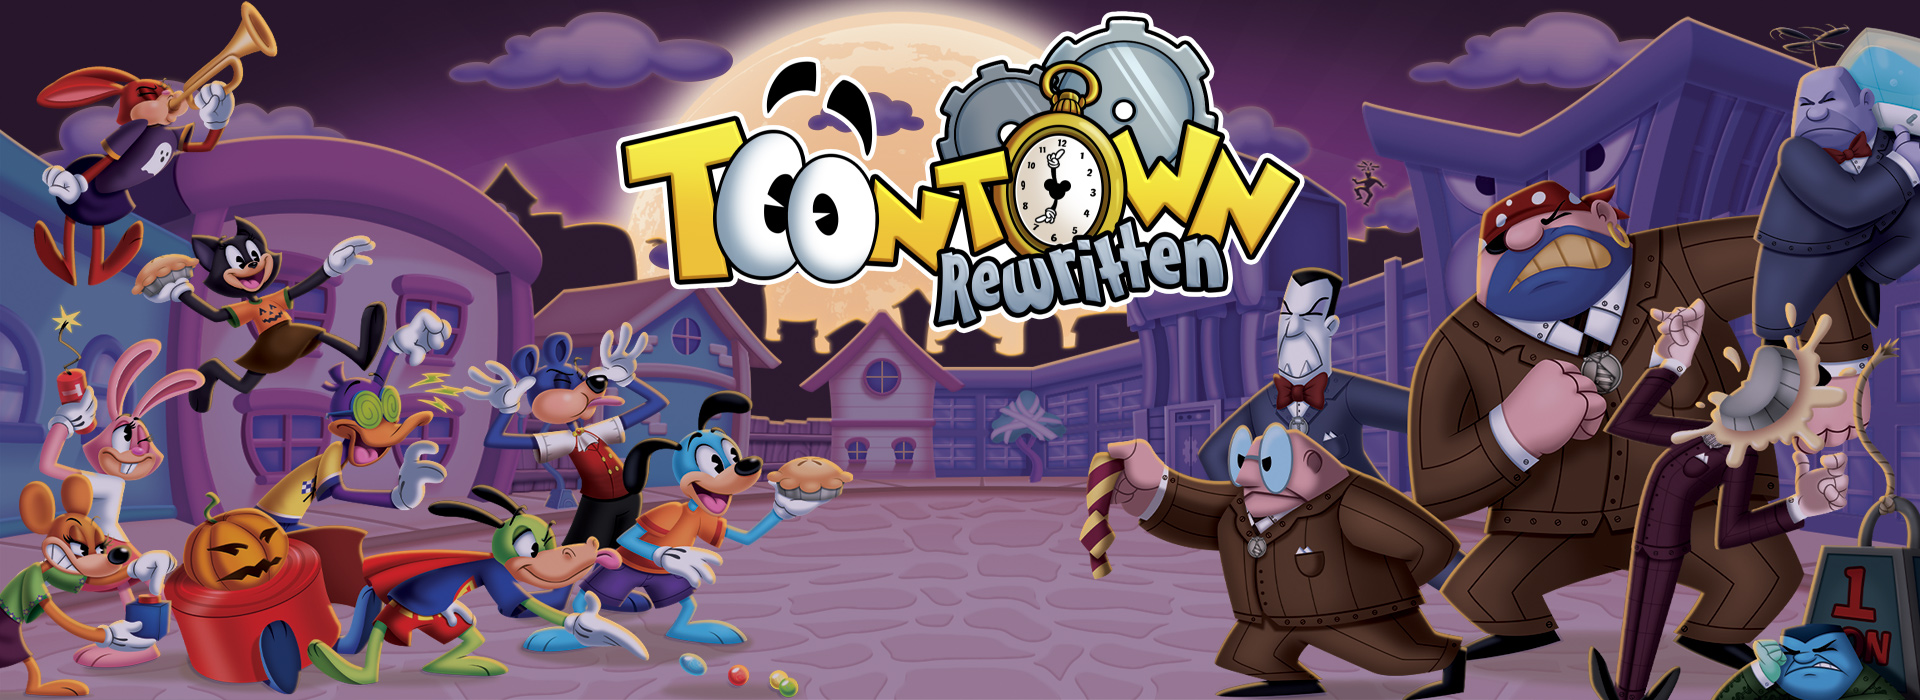 Home Toontown Rewritten - toontown on roblox youtube